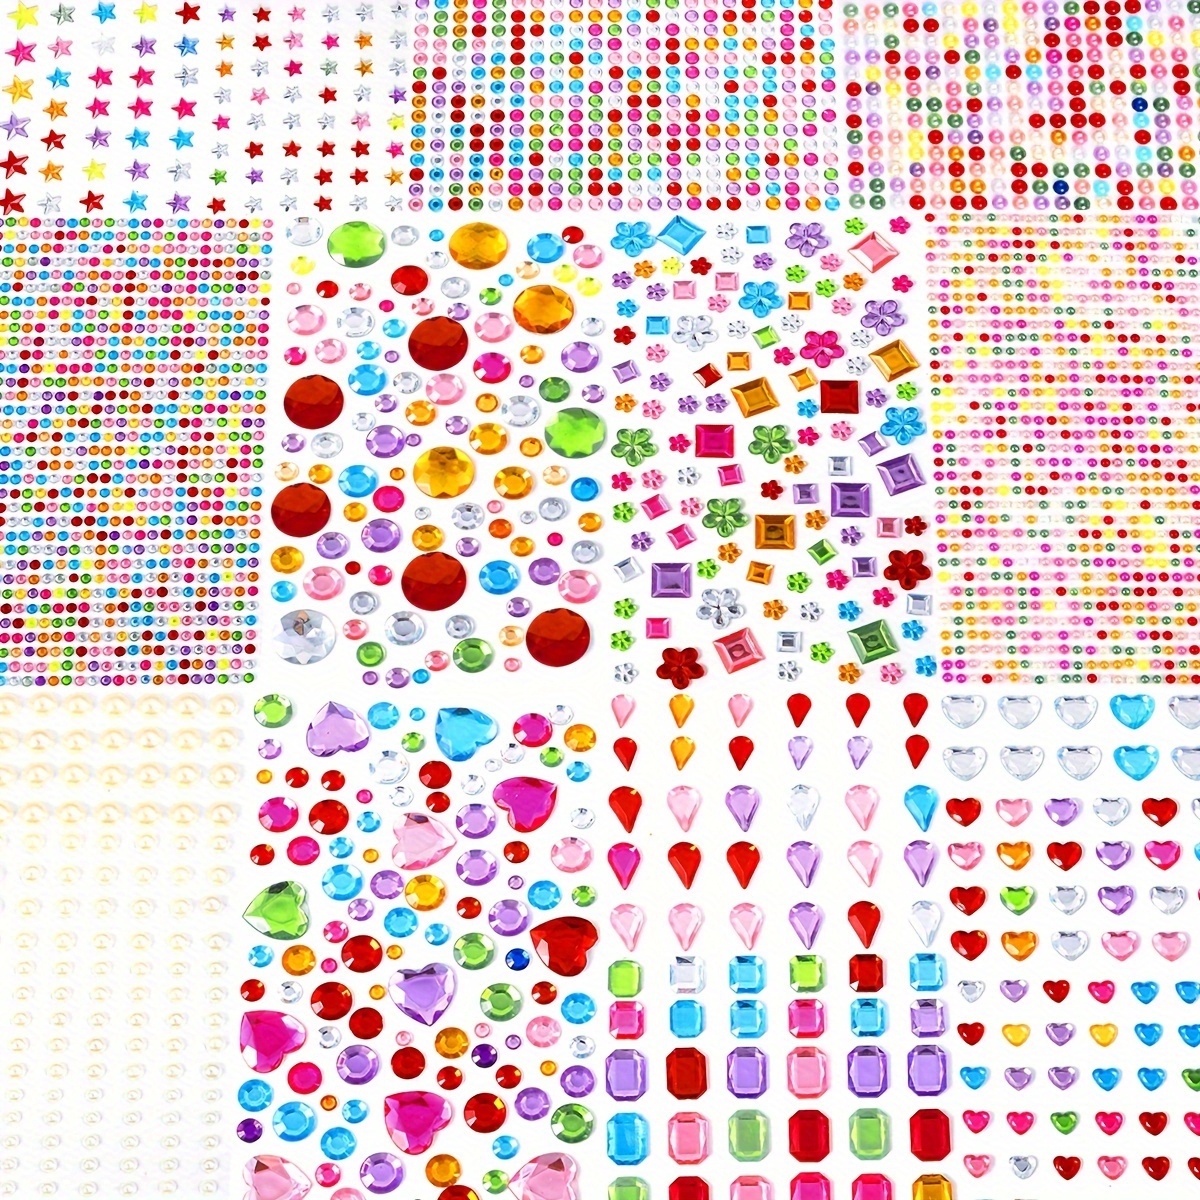 

3034pcs Plastic Rhinestone Sticker Gems, Self-adhesive Jewel Stickers For Diy Crafts, Assorted Shapes & Colors Bead Assortment For Scrapbooking, Decorations, And Creative Design